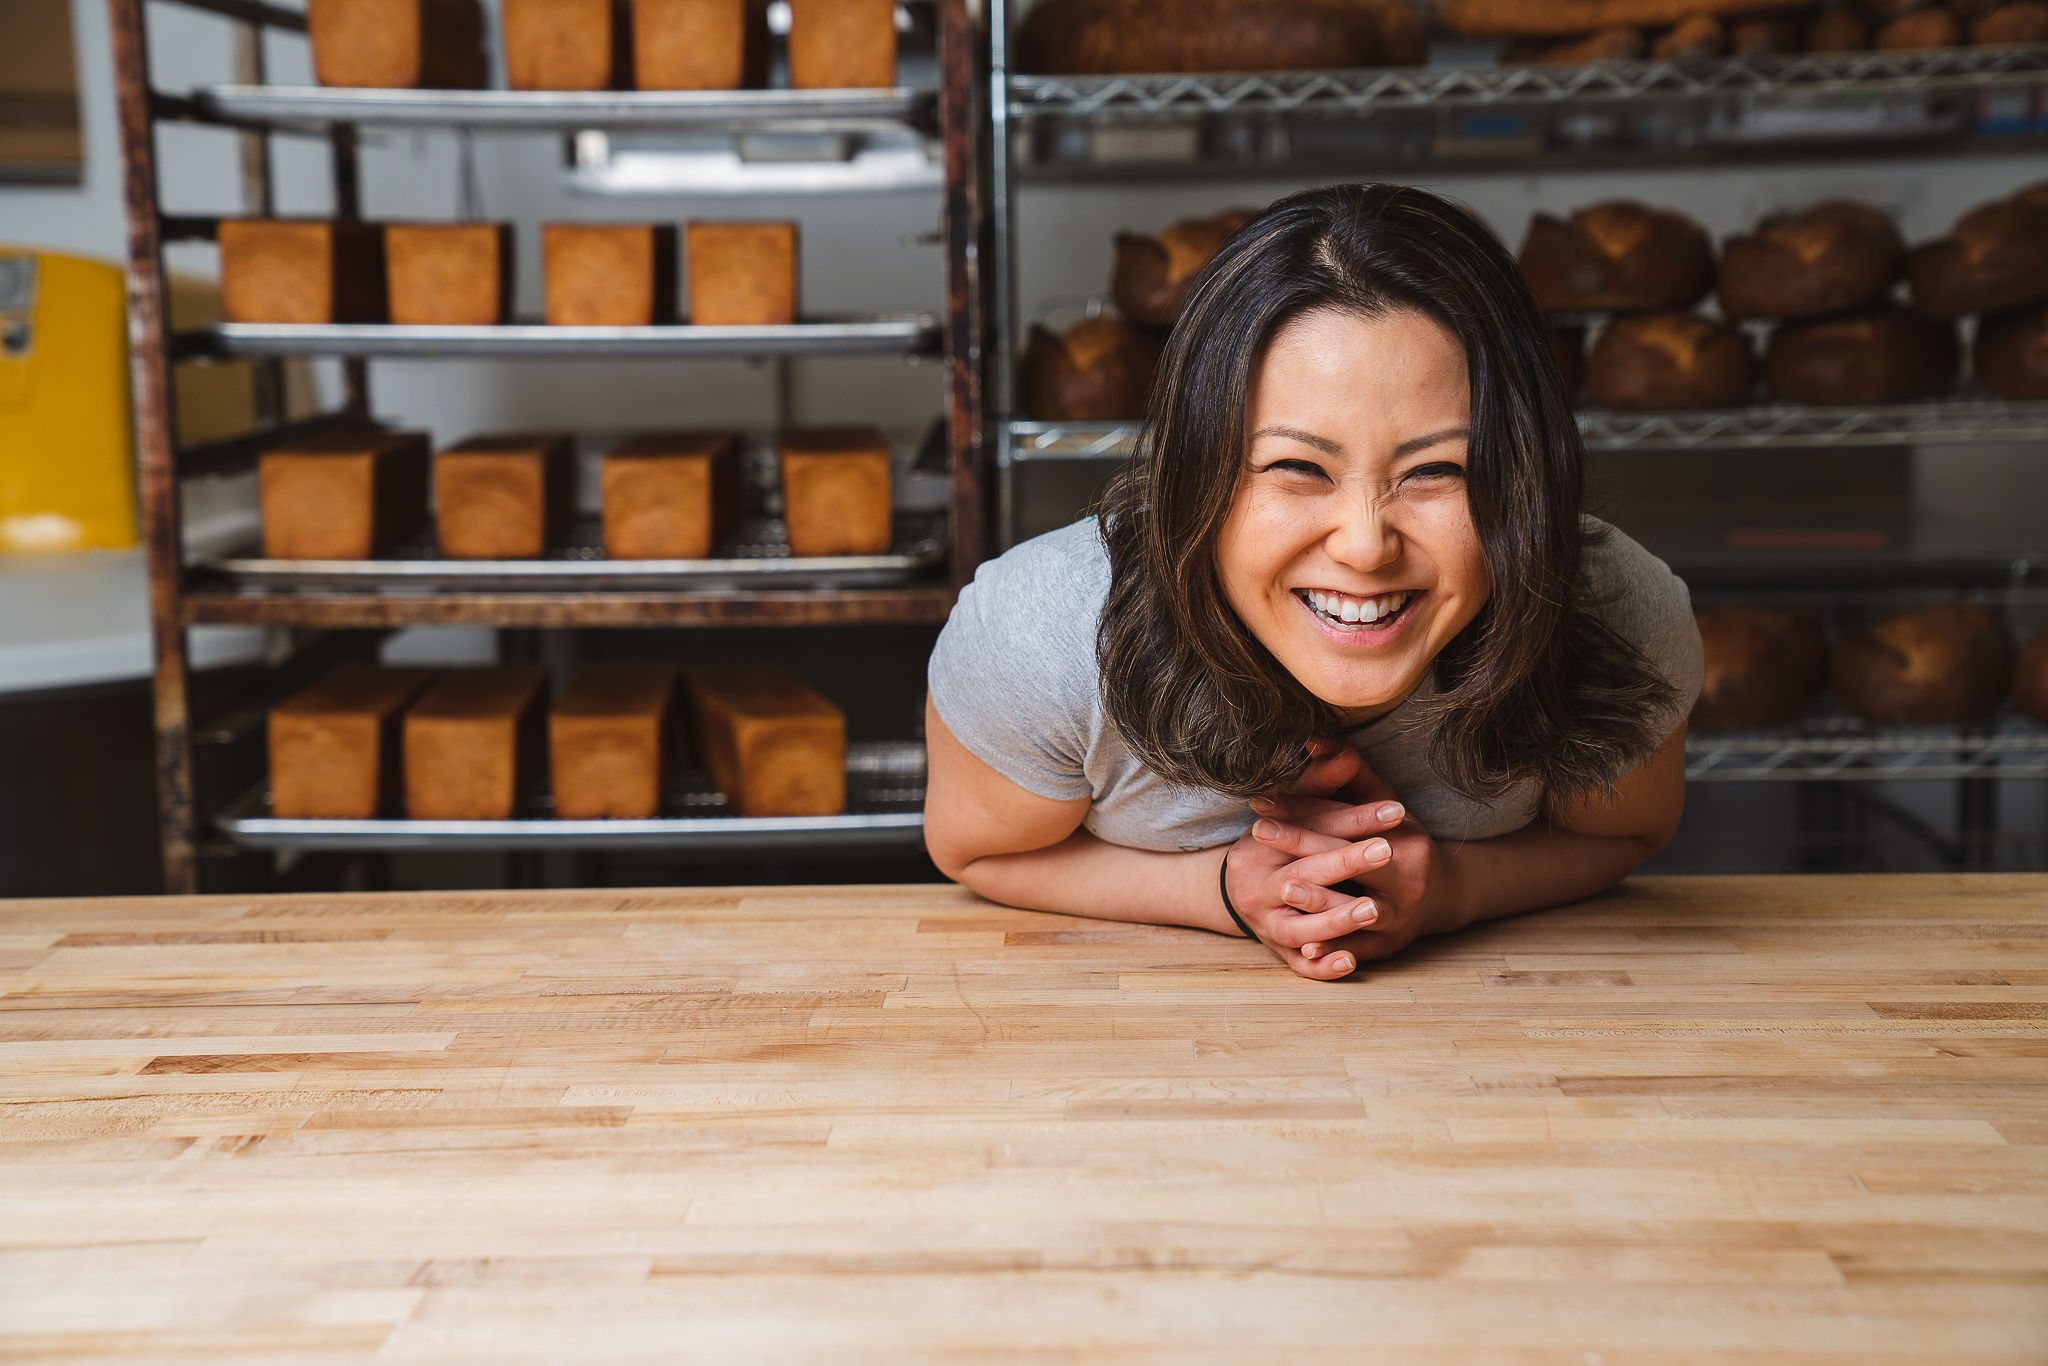 A woman with long and black hair smiles and leans over a wooden table with loaves of bread on racks in the background.